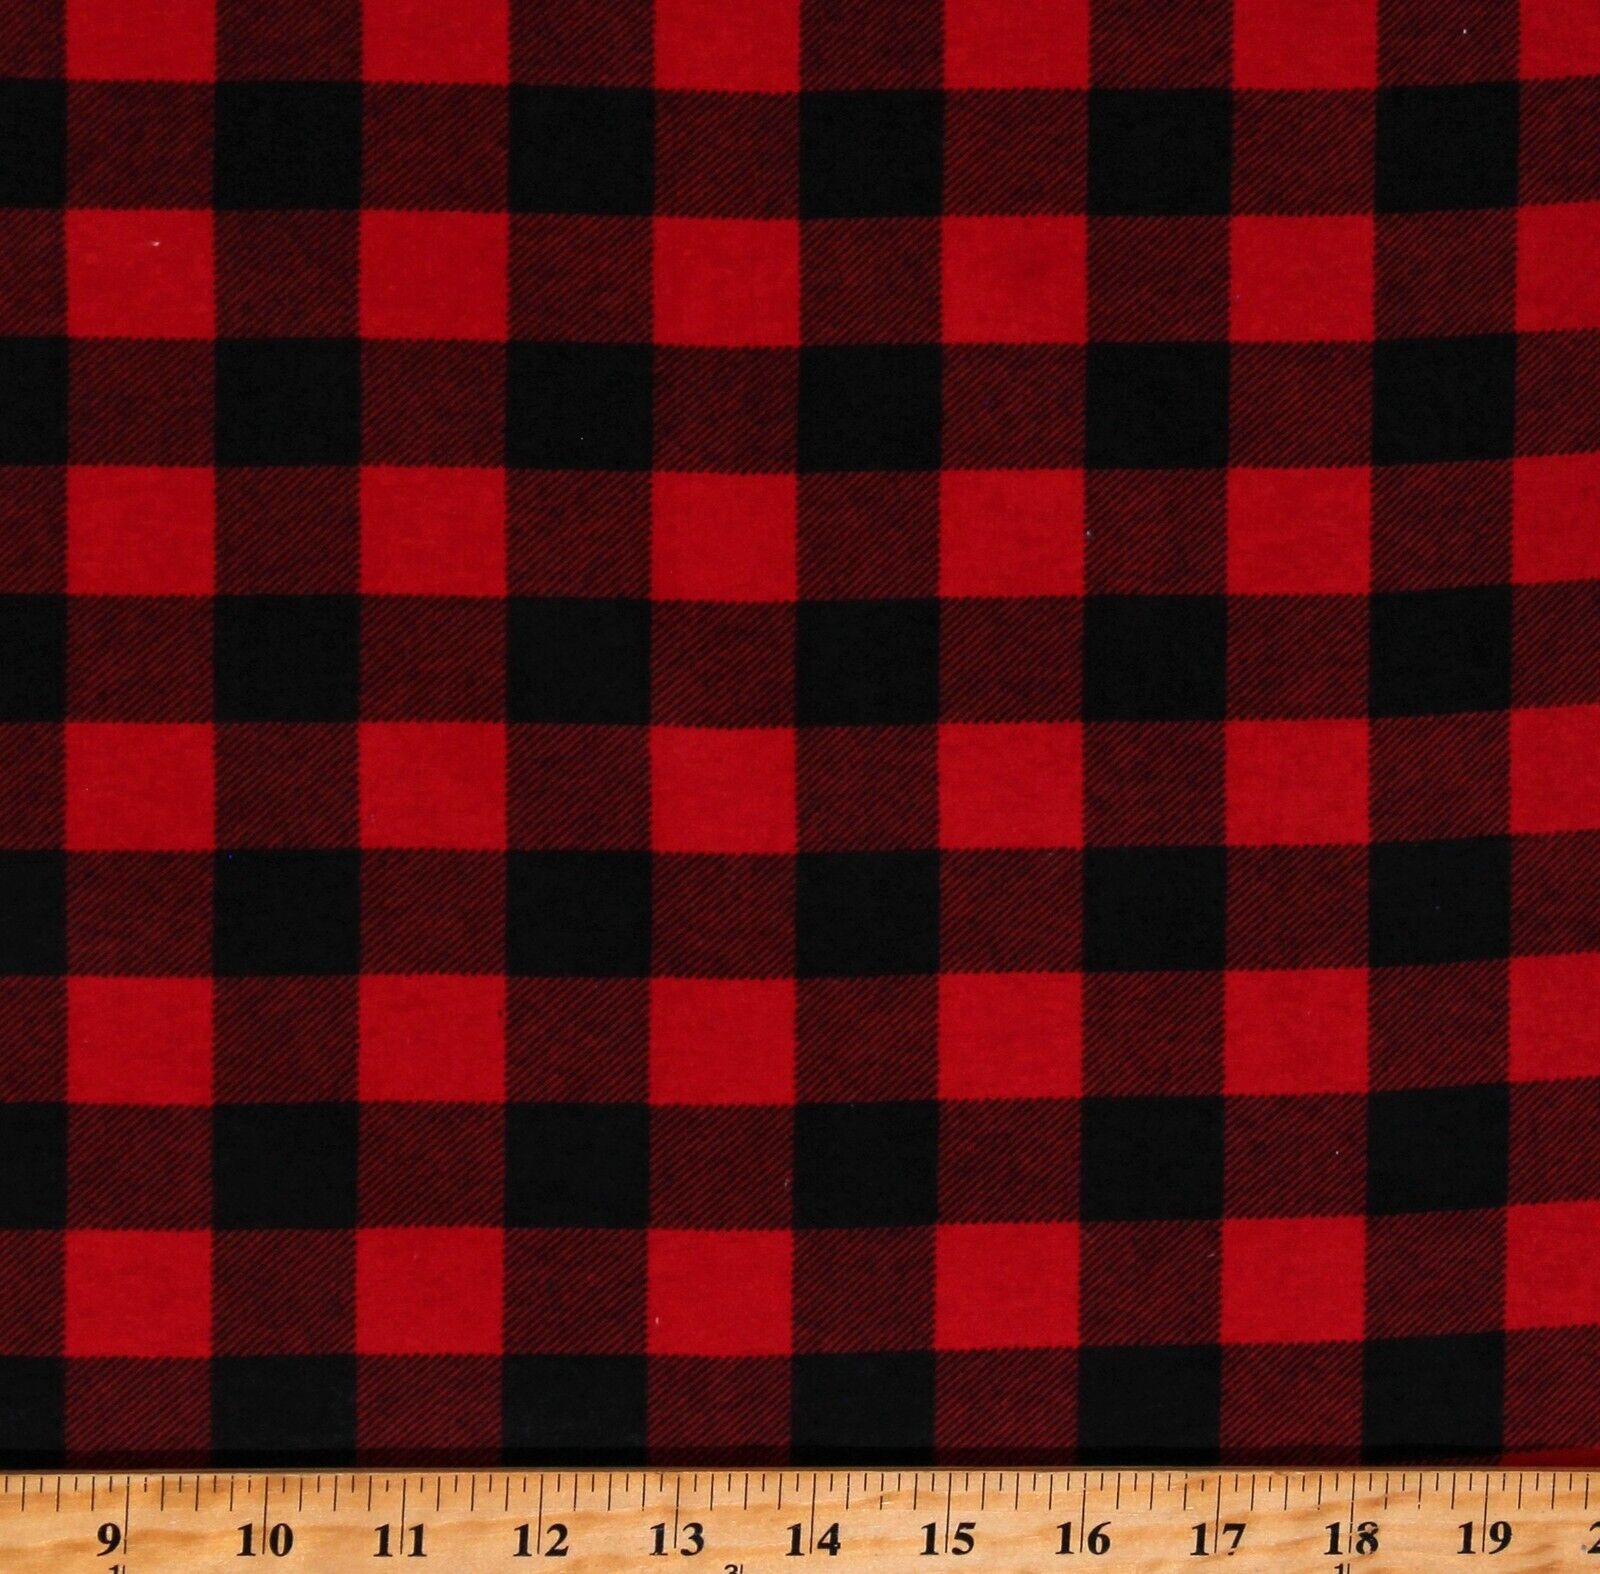 Great Choice Products Flannel Buffalo Plaid Red Black Prt Cotton Flannel Fabric Print By Yard D275.28